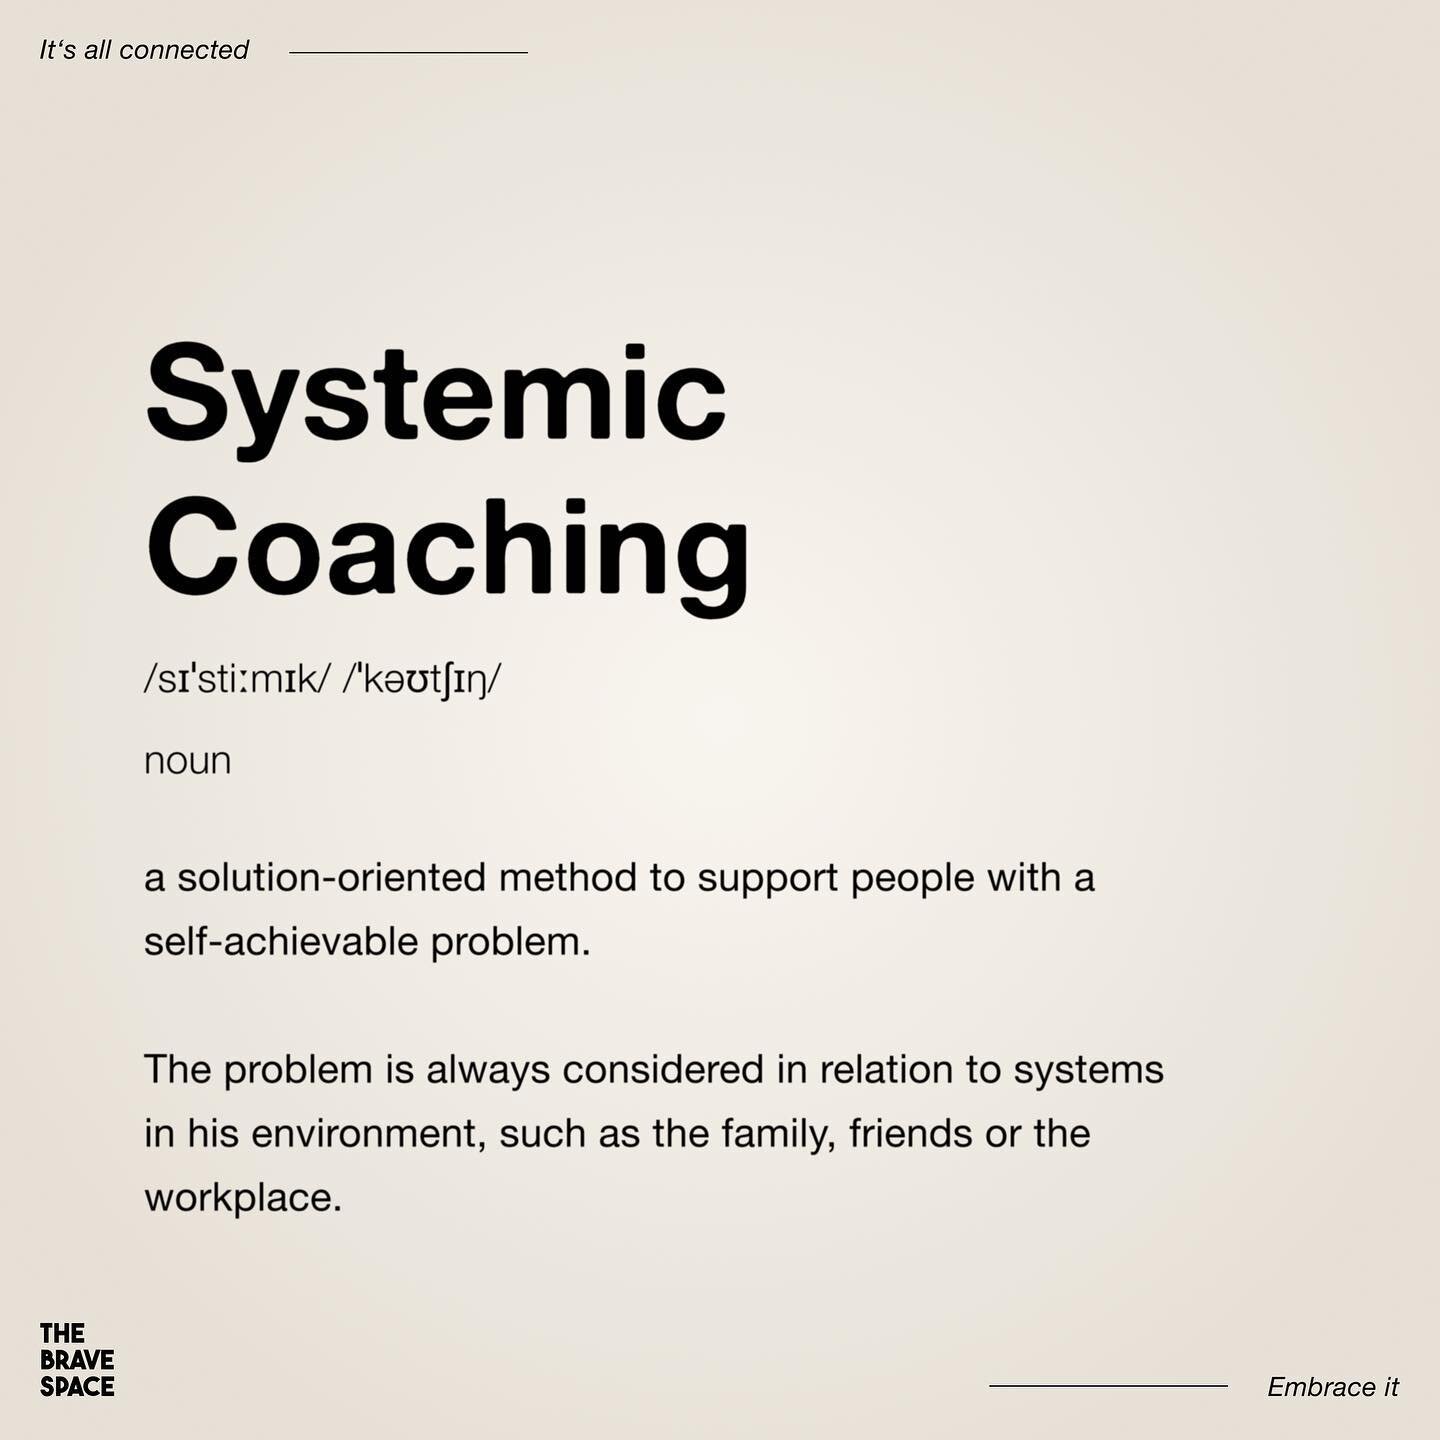 ~ It&lsquo;s all connected, embrace it ~ 

THE BRAVE SPACE is a space for systemic coaching. It is a space for inspiration, transformation and love. 
And this account and community is for sharing more knowledge of Systemic Coaching with you. 
 
What 